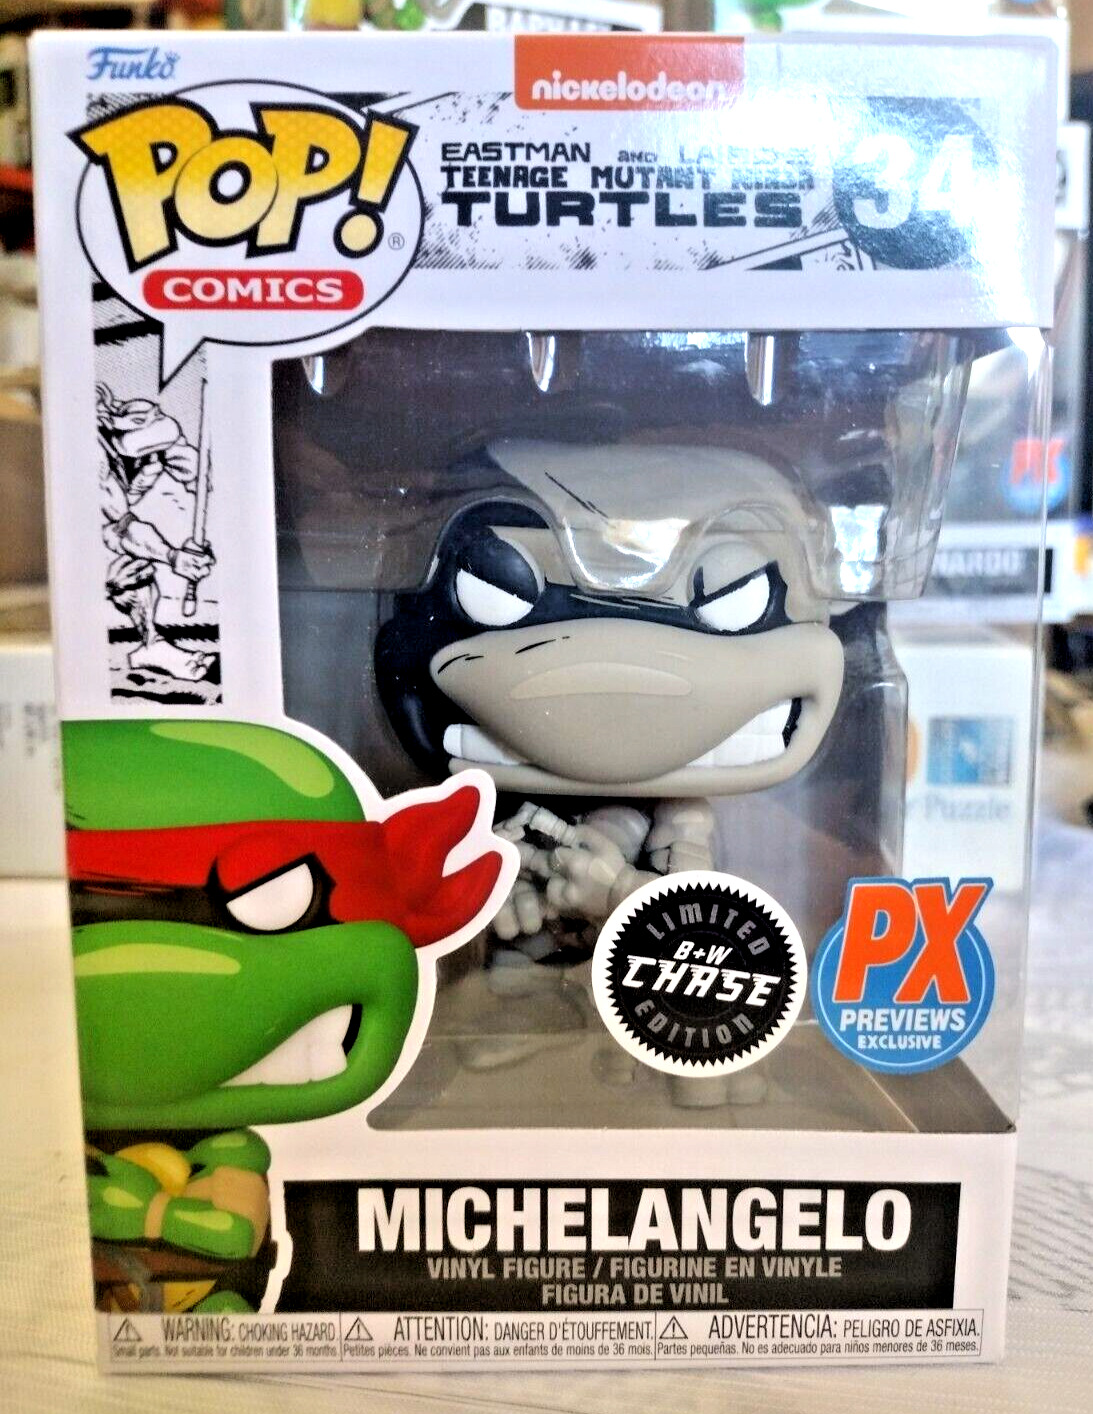 Funko POP PREVIEWS EXCLUSIVE CHASE VARIANT Michelangelo Black and White Figure